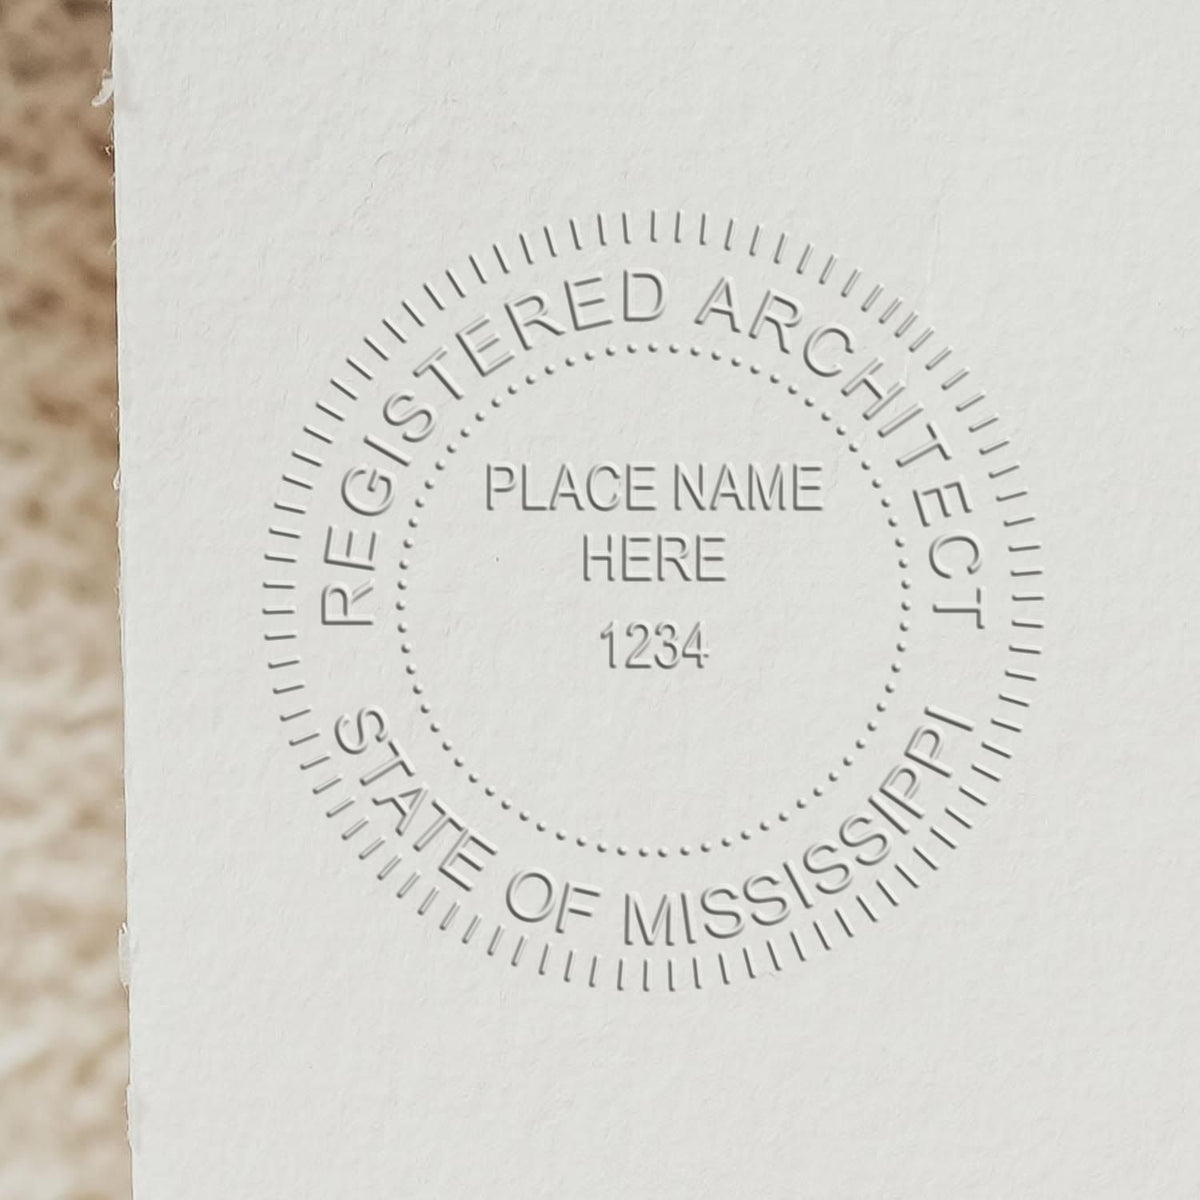 This paper is stamped with a sample imprint of the Extended Long Reach Mississippi Architect Seal Embosser, signifying its quality and reliability.